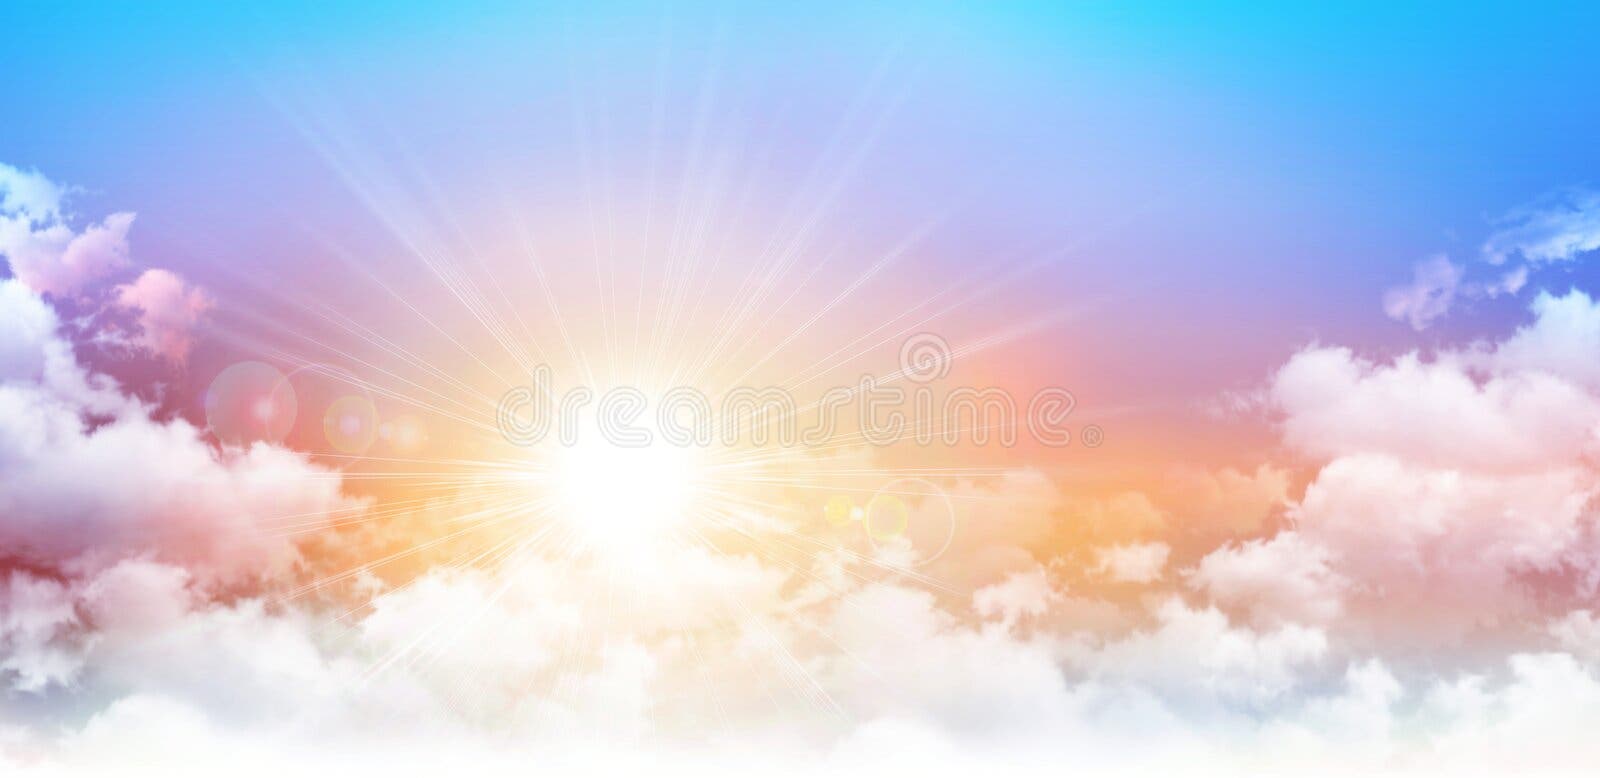 279,880 Rising Sun Images, Stock Photos, 3D objects, & Vectors